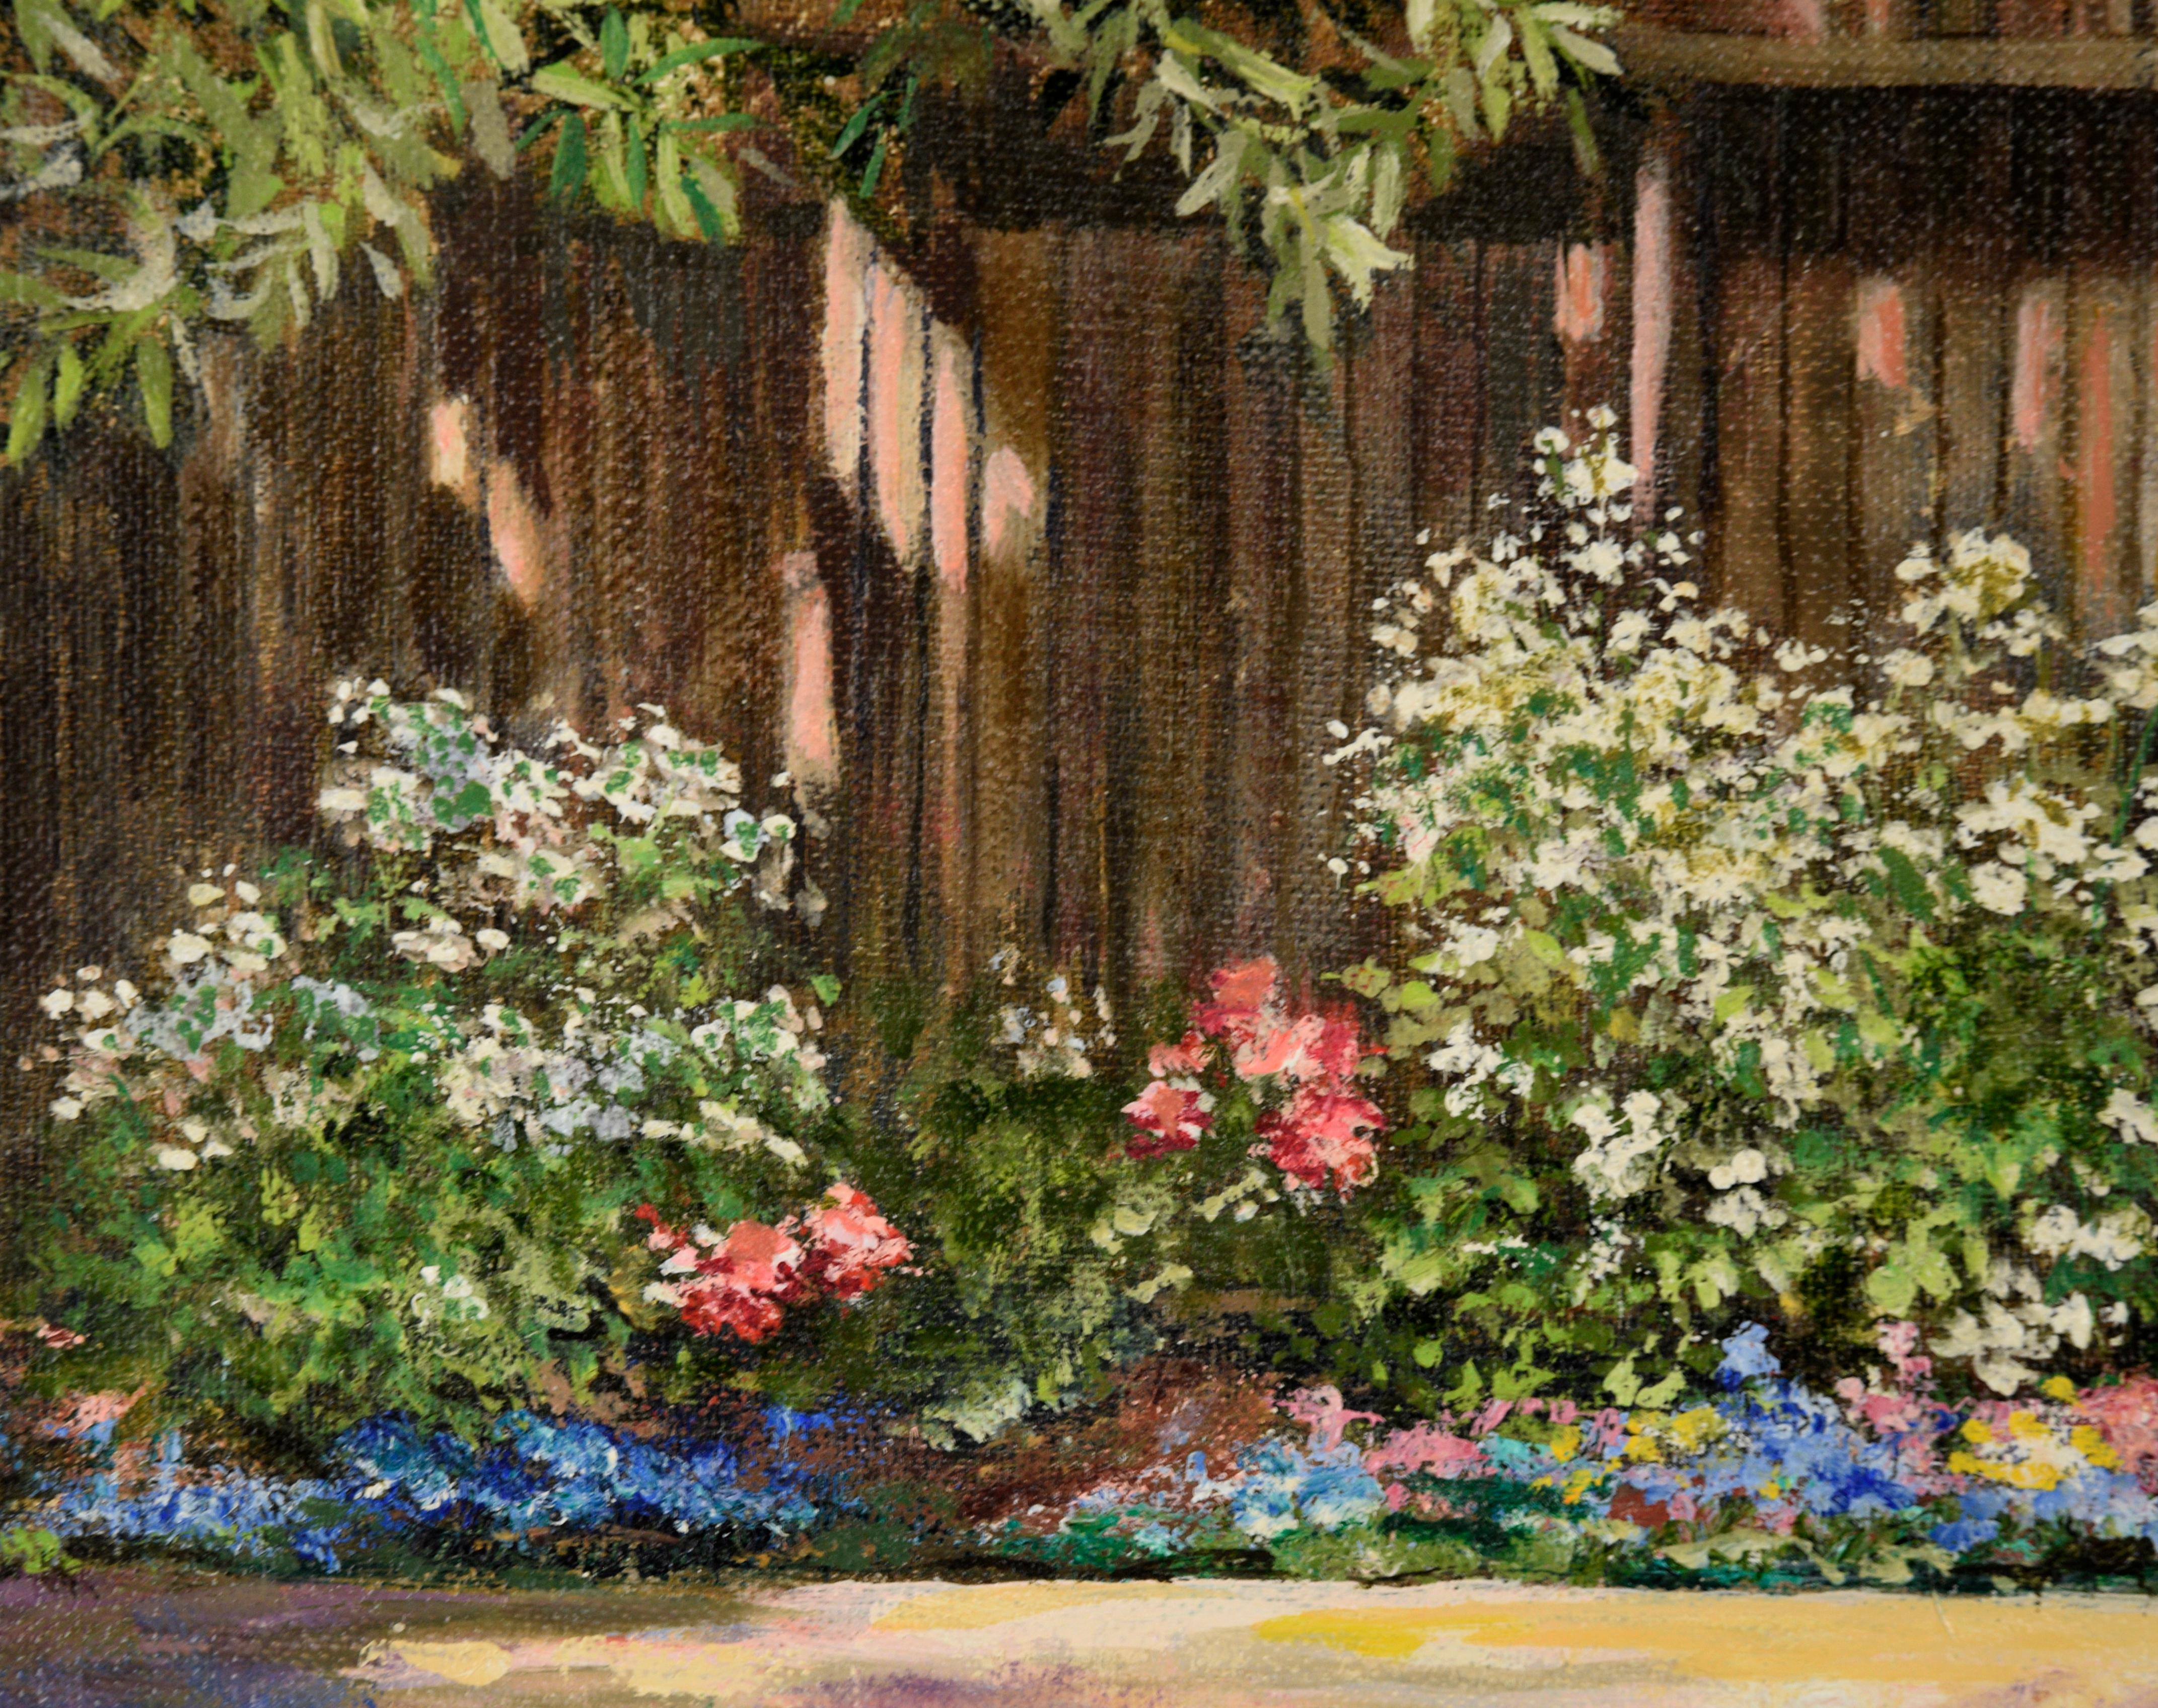 Highly detailed landscape of a garden along a fence by an unknown artist (20th Century). Sunlight illuminates a patch of flowers planted along a fence and path. There is a lovely contract between the brightly colored flowers, the tan fence, and the